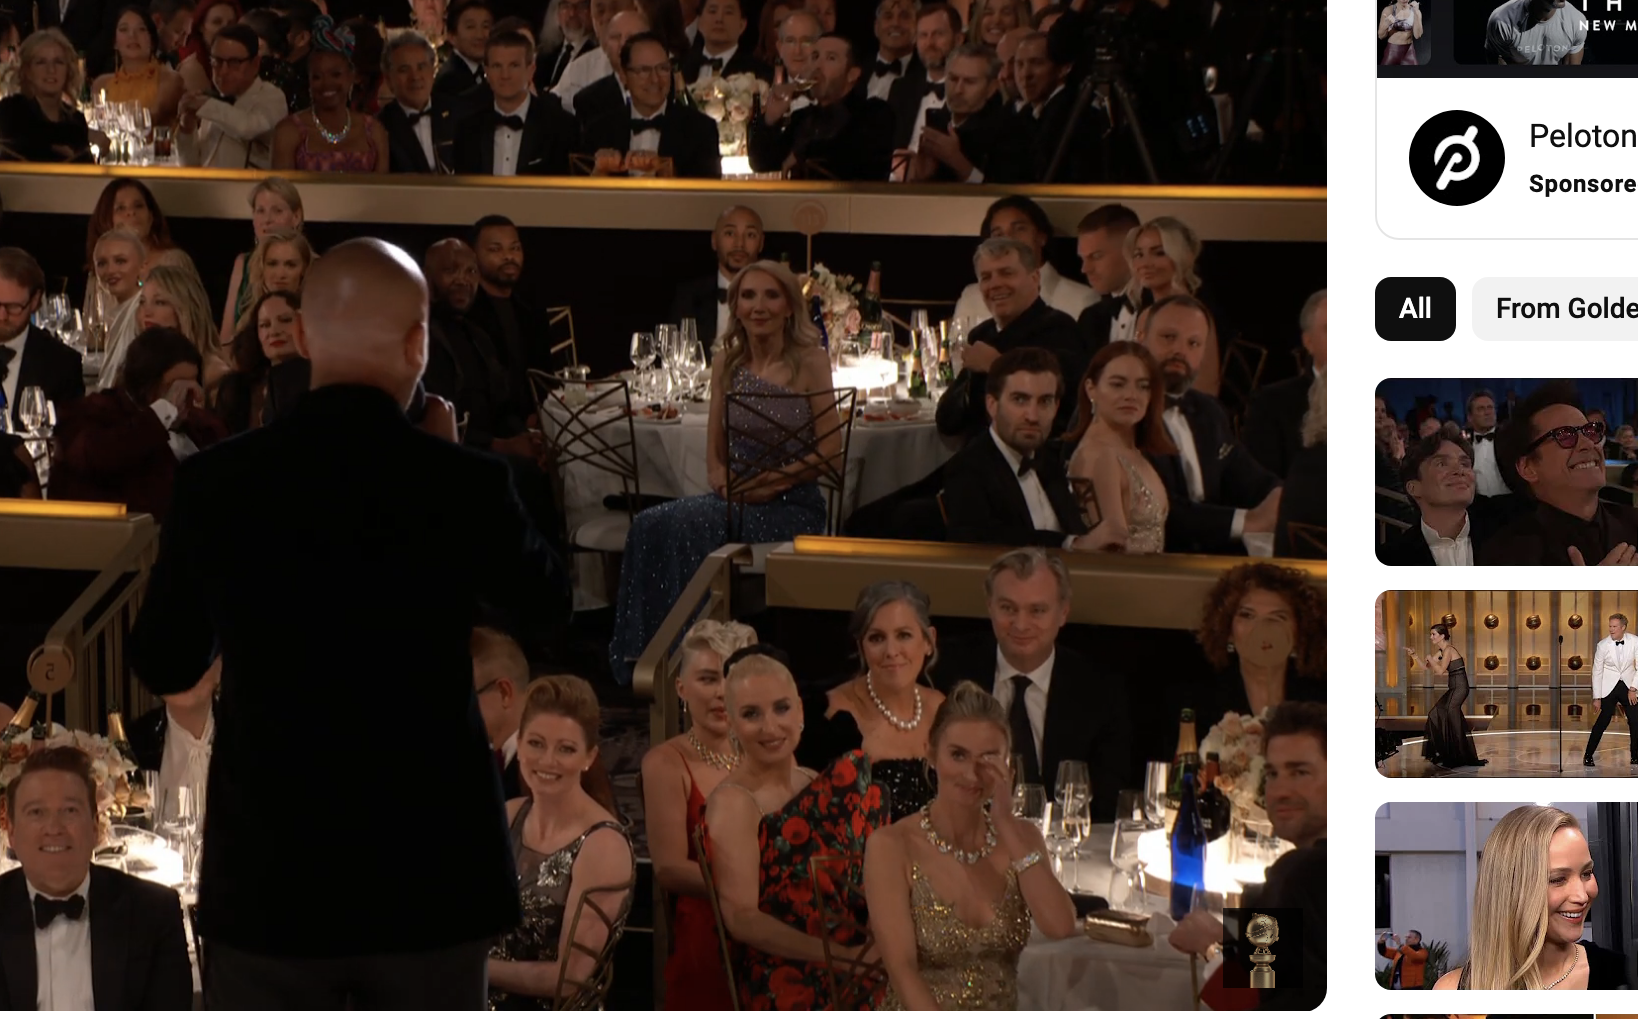 Jo onstage at the Golden Globes